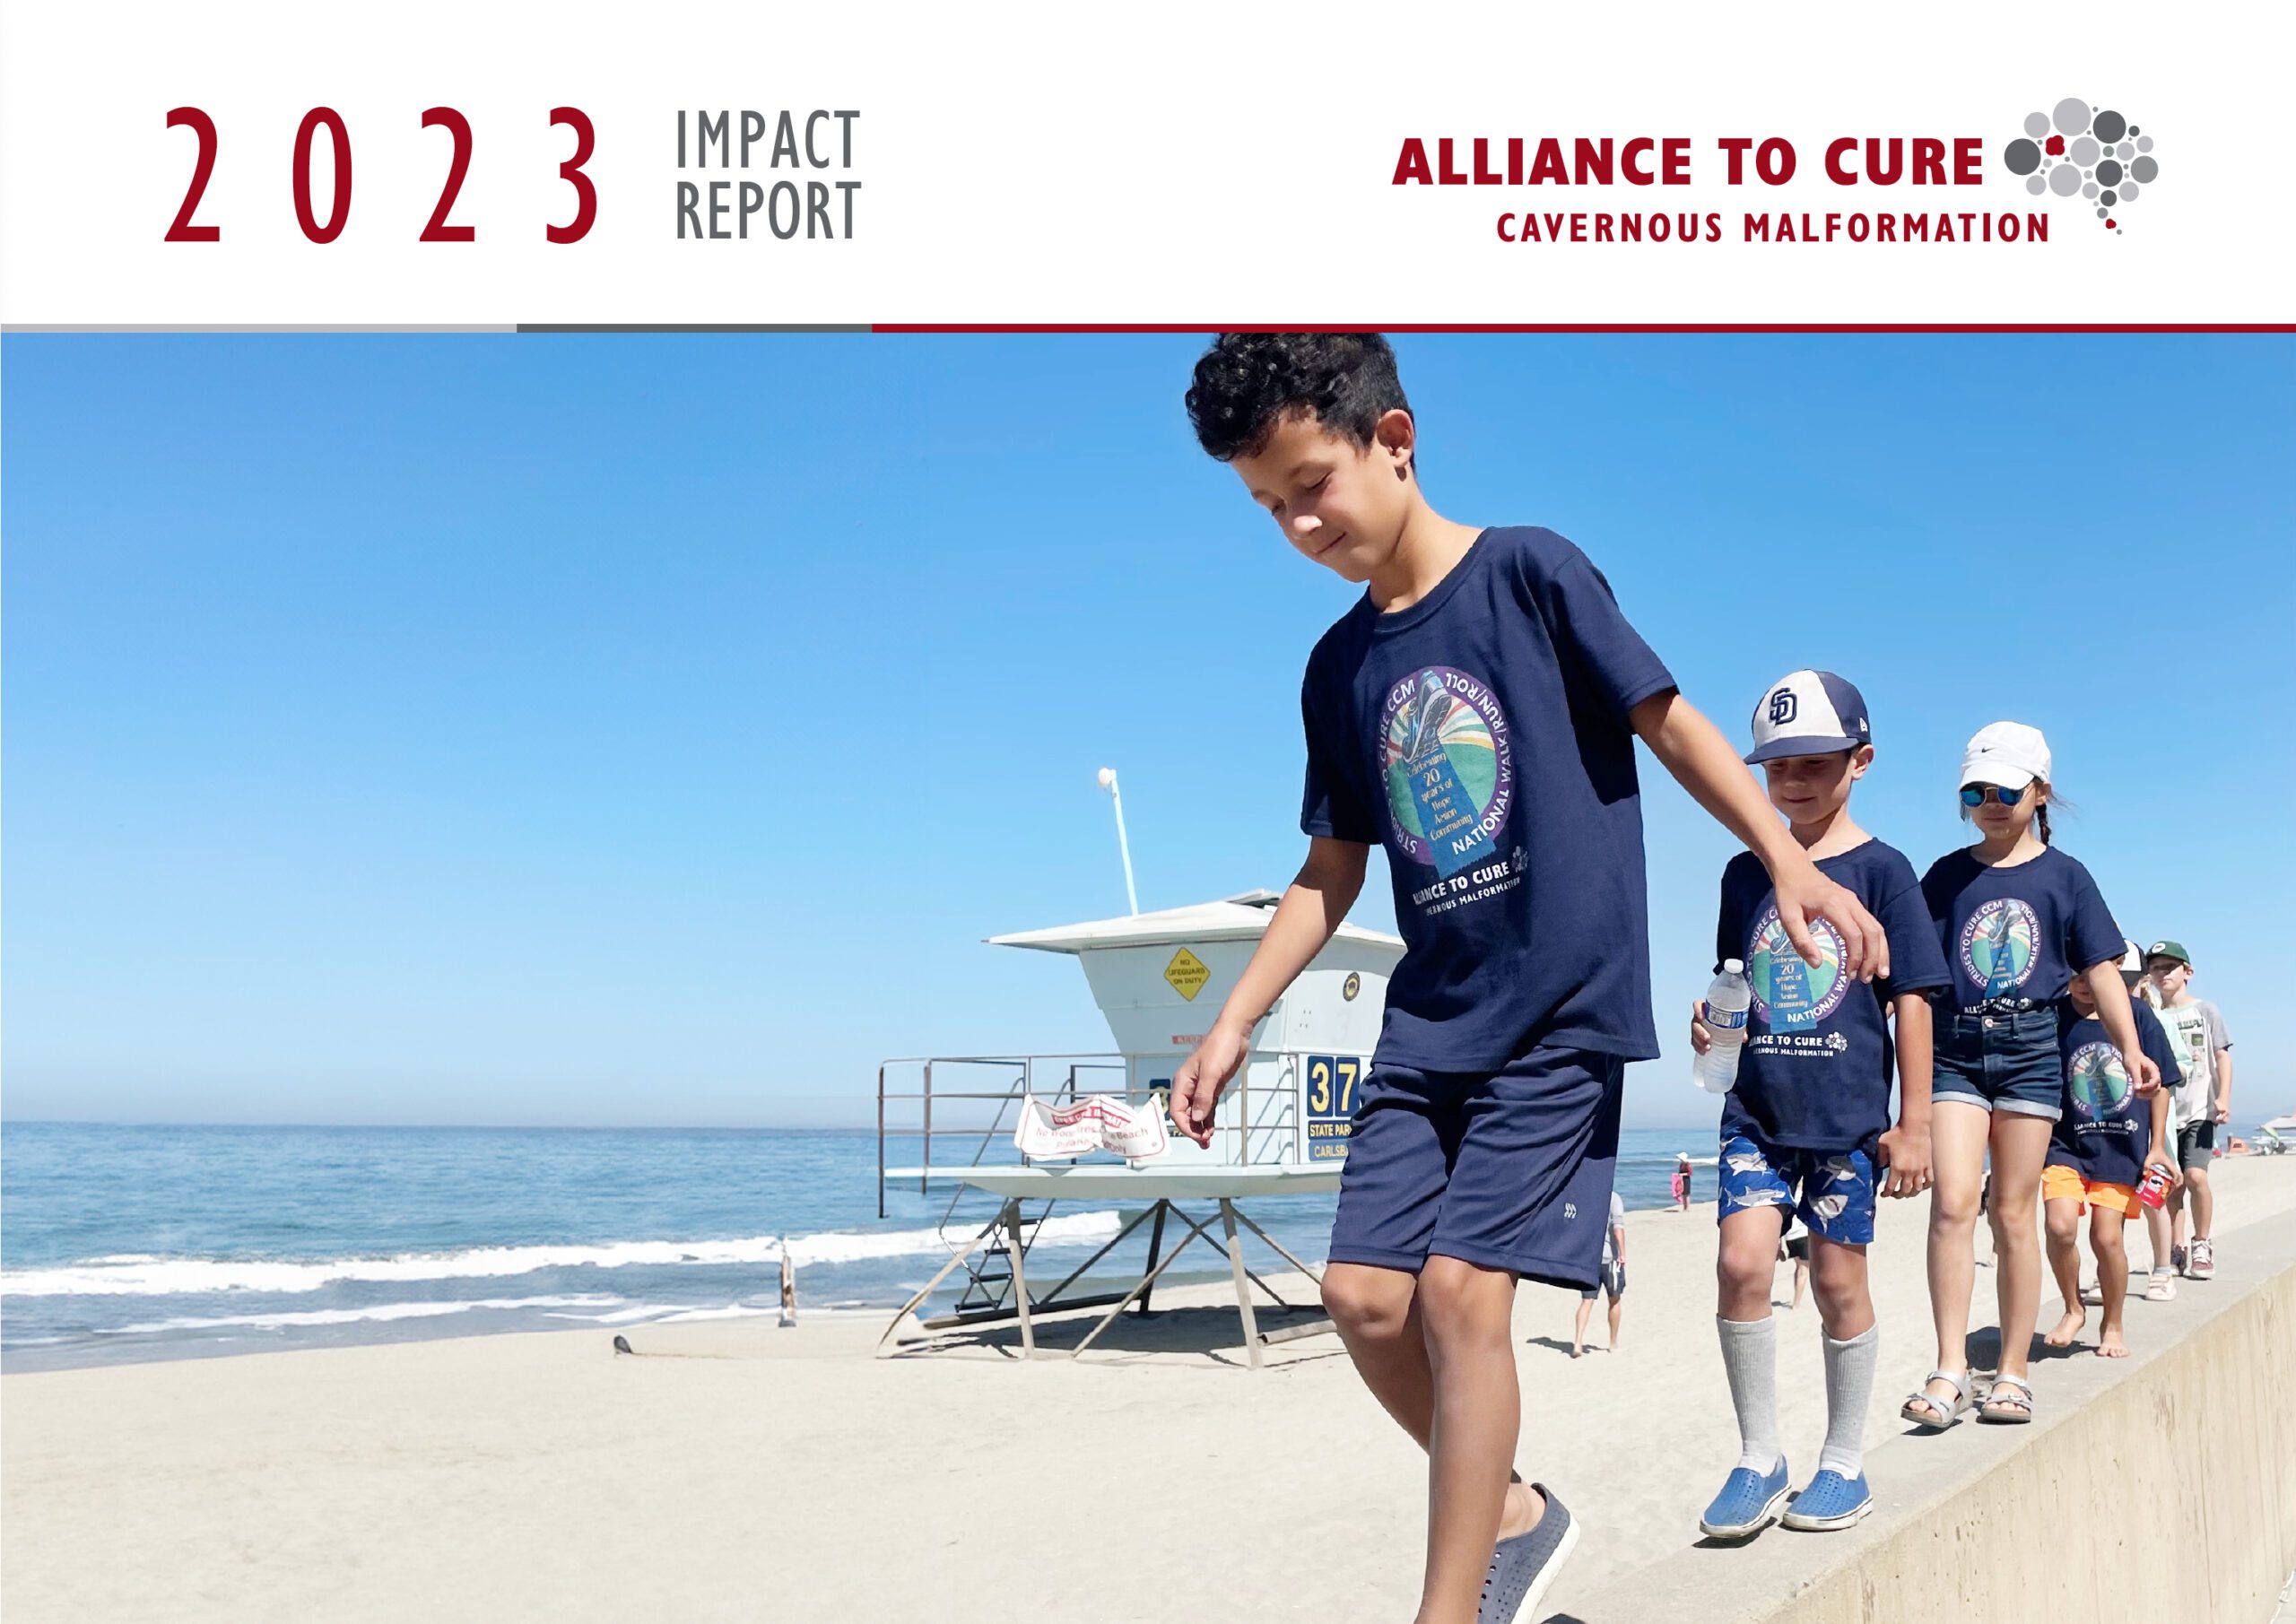 Children wearing shirts that say Alliance to Cure walk along the beach in front of a blue sky.